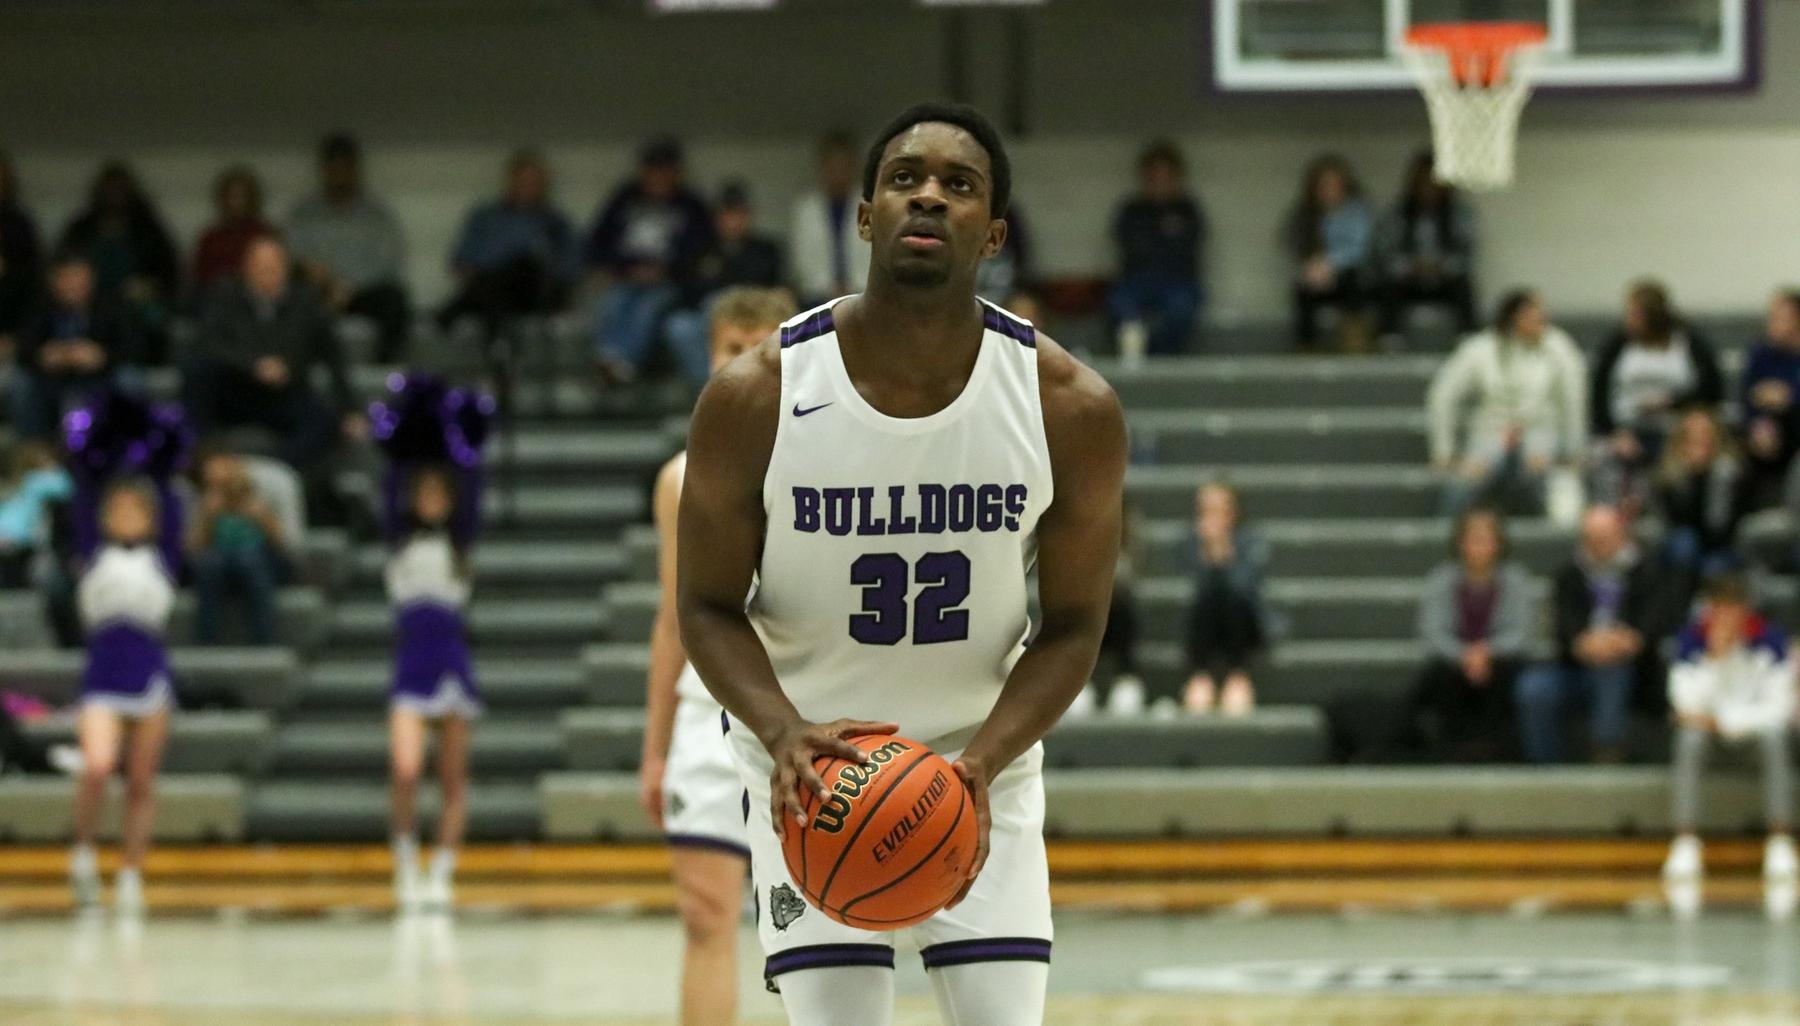 @bhsdogsbhoops' Edmonds selected for IndyStar Indiana All-Stars